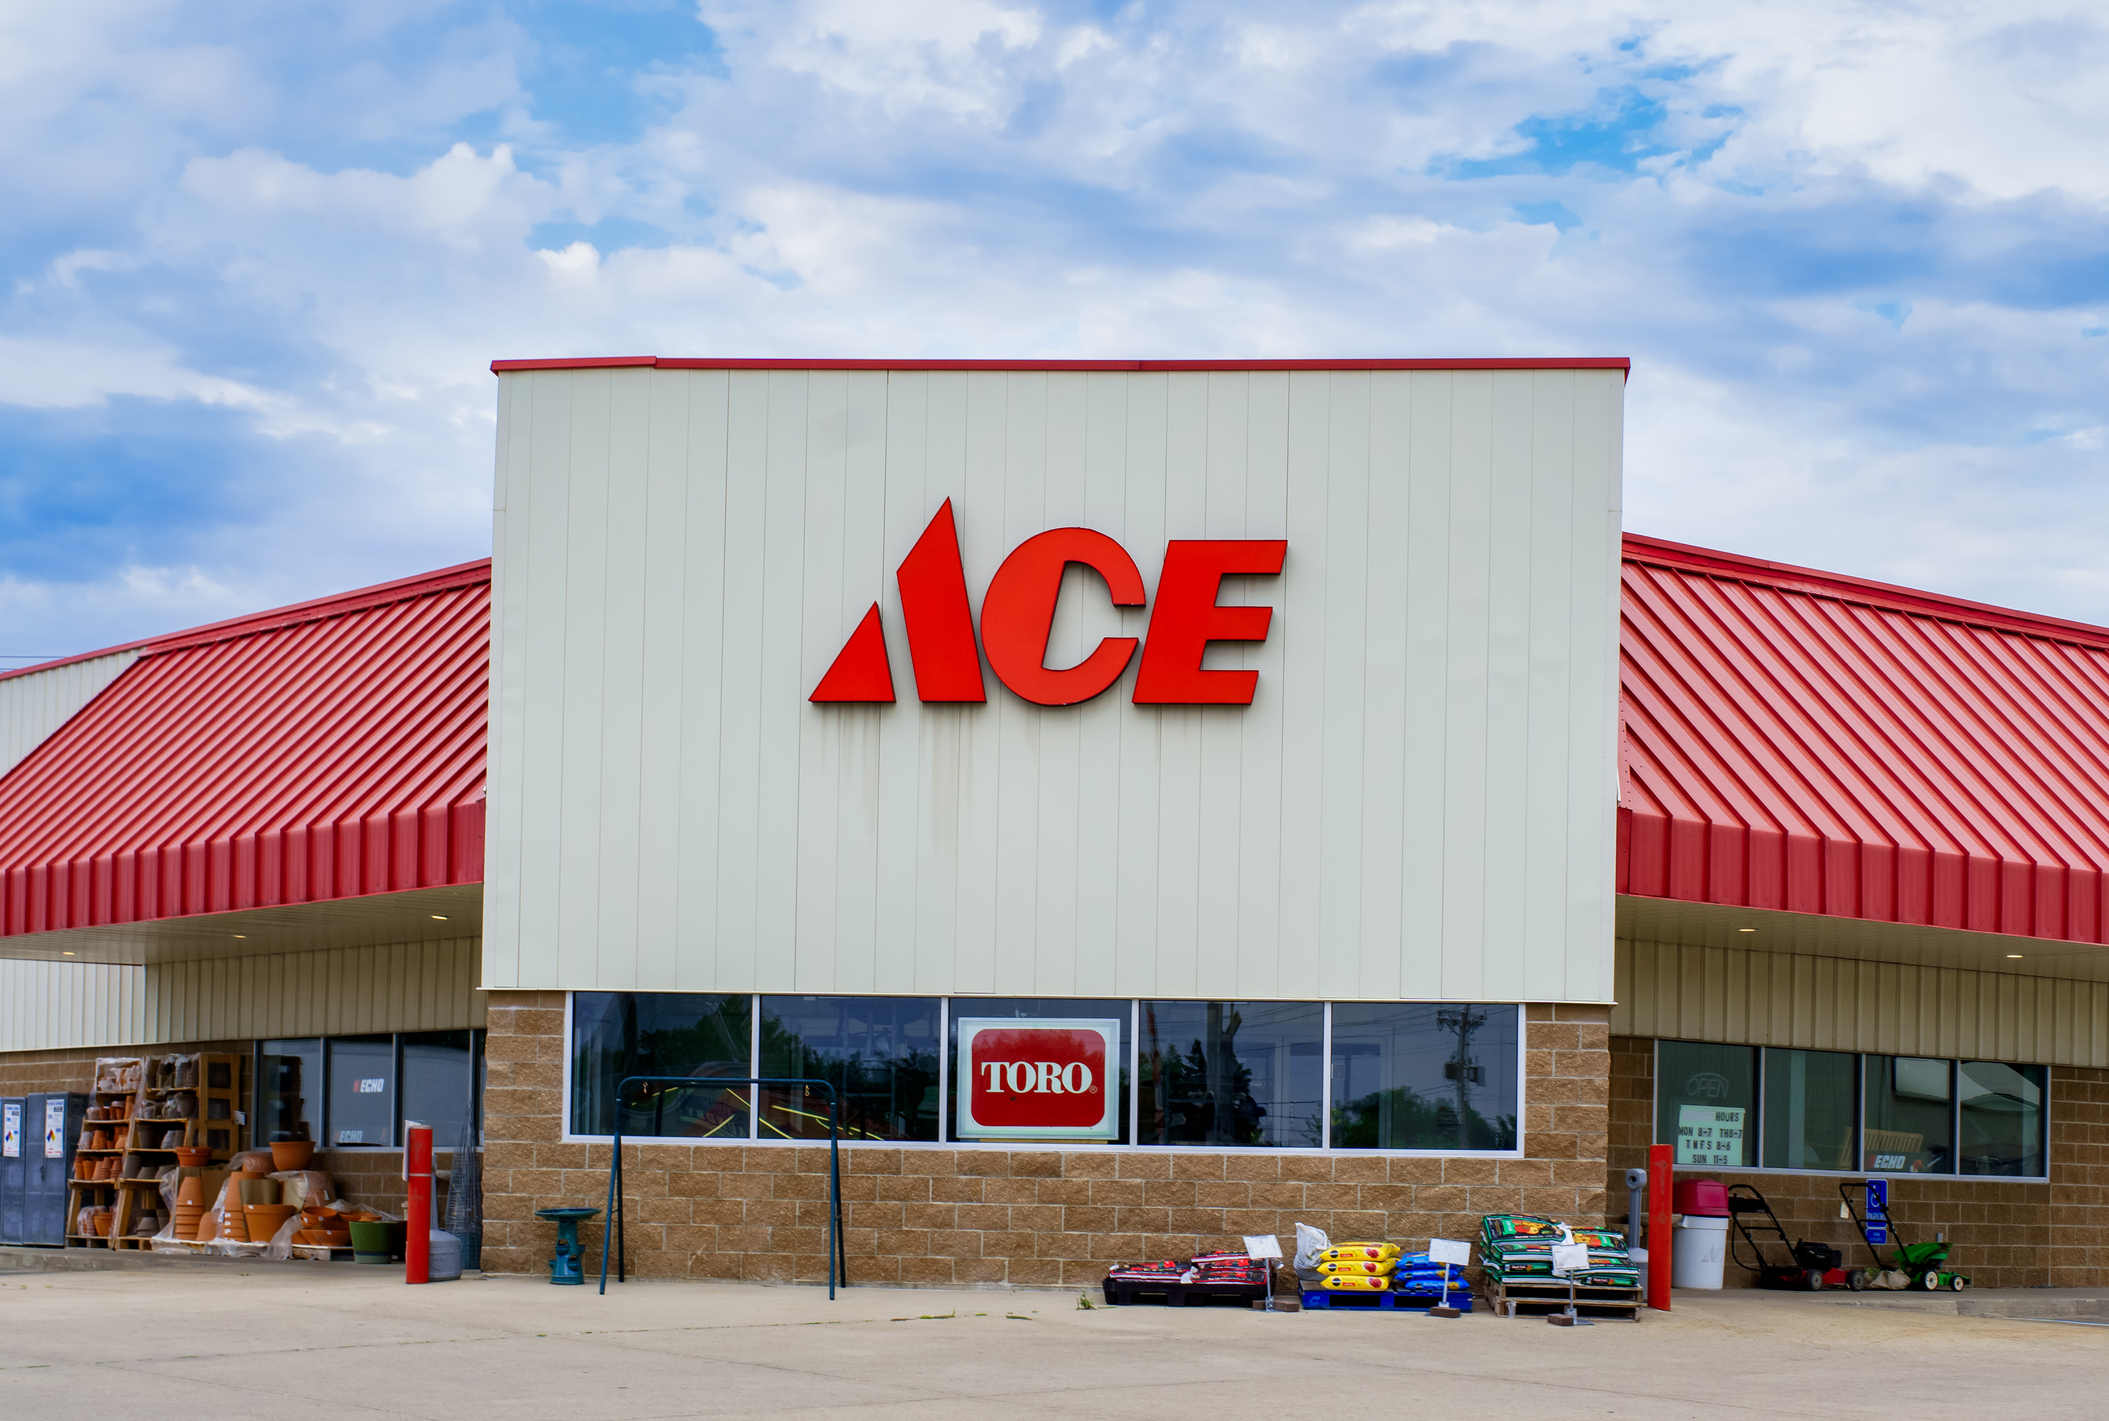 Ace Hardware promo codes: Take 10% off select regular-priced items